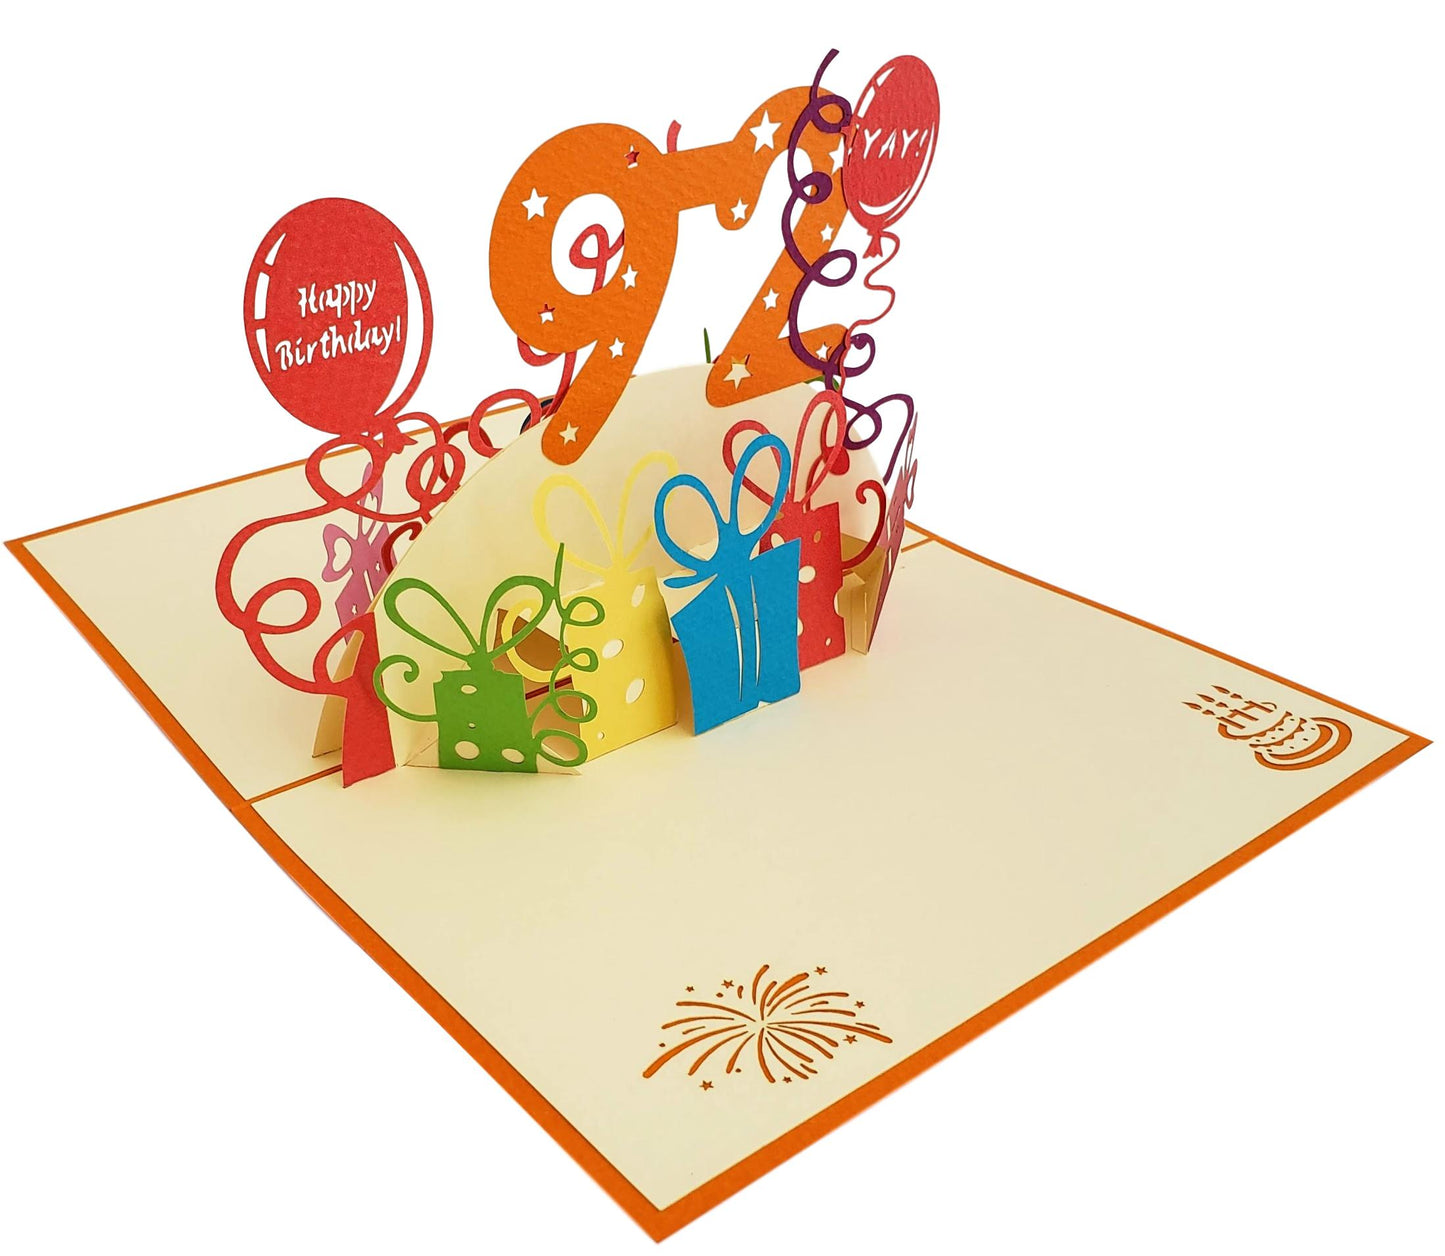 Happy 92nd Birthday with Presents 3D Pop Up Greeting Card - Birthday - funny birthday - Happy Birthd - iGifts And Cards